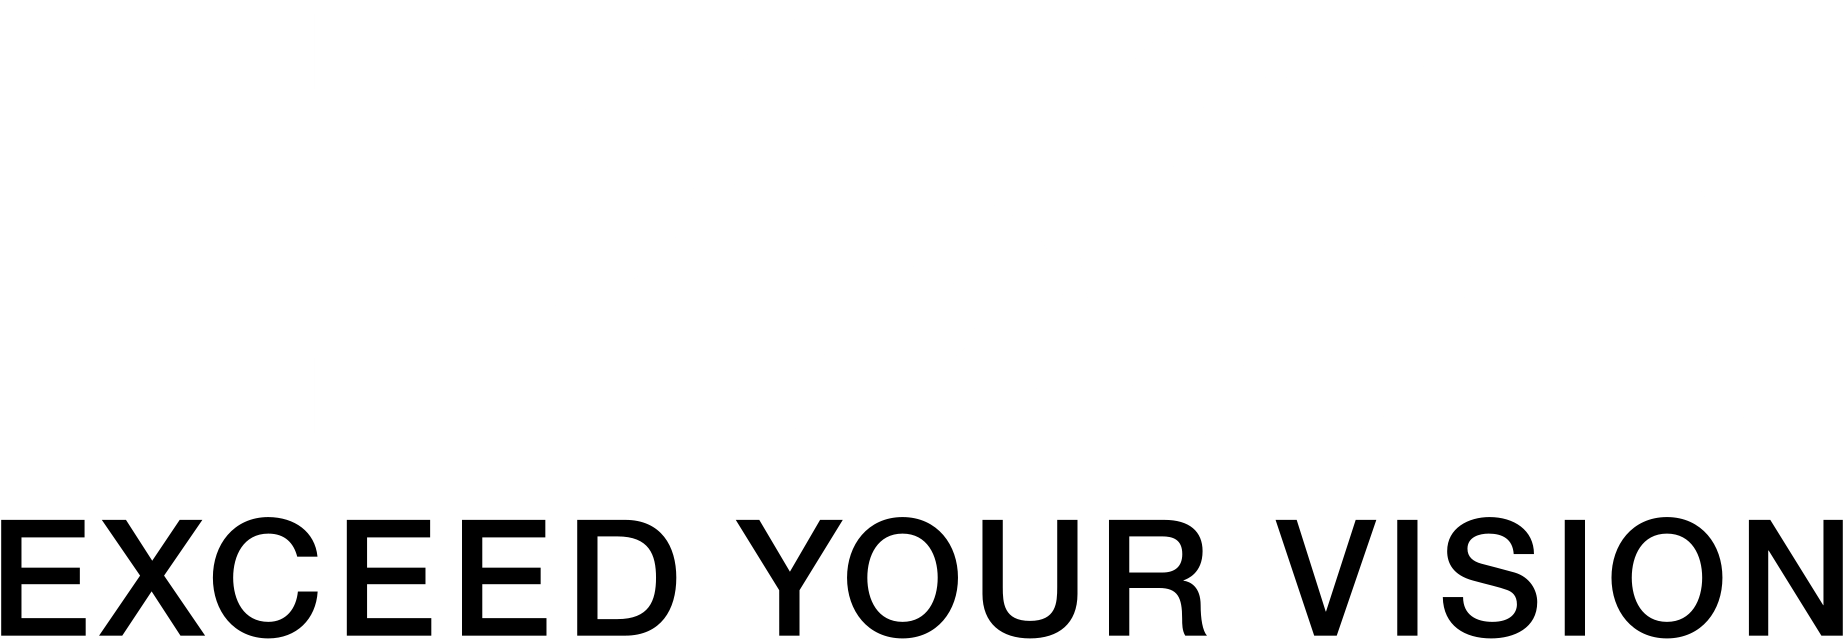 Epson Logo And Symbol, Meanin